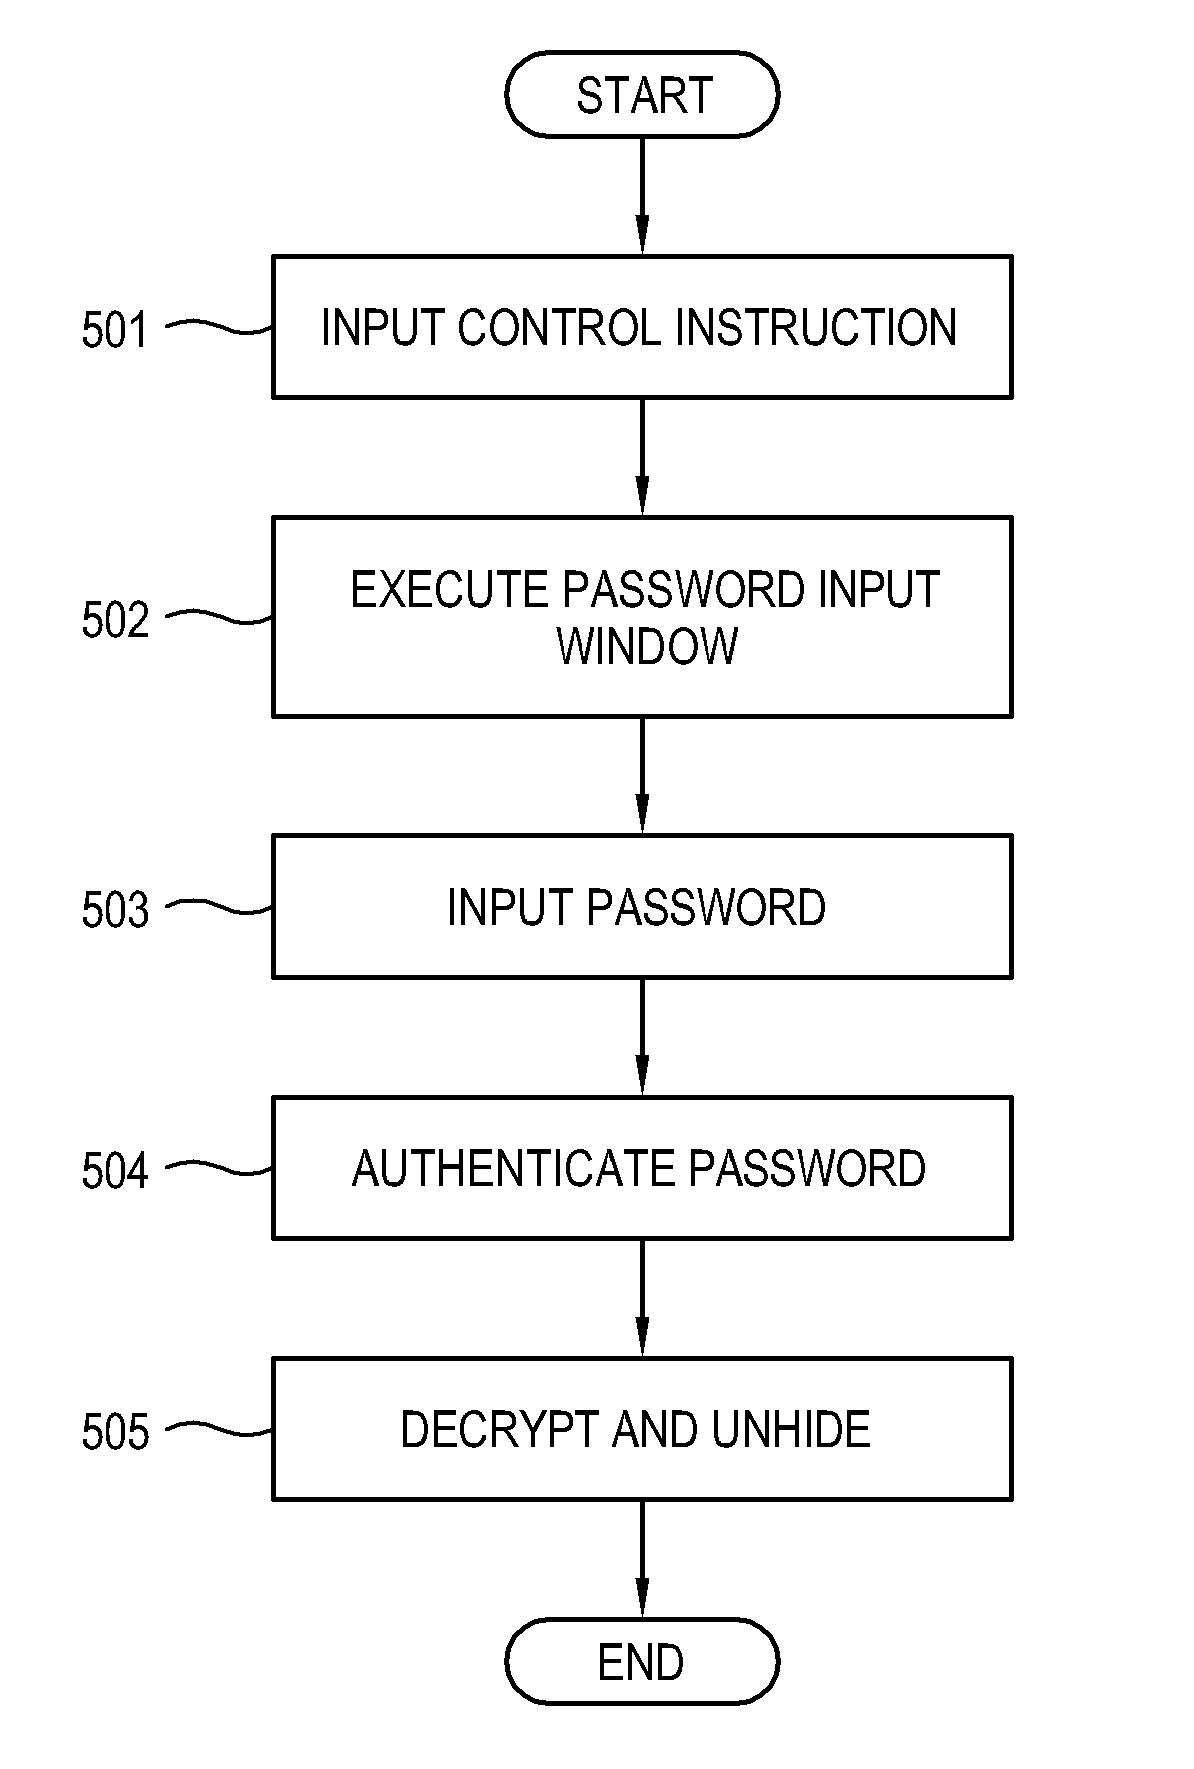 Method and apparatus for controlling objects of a user interface